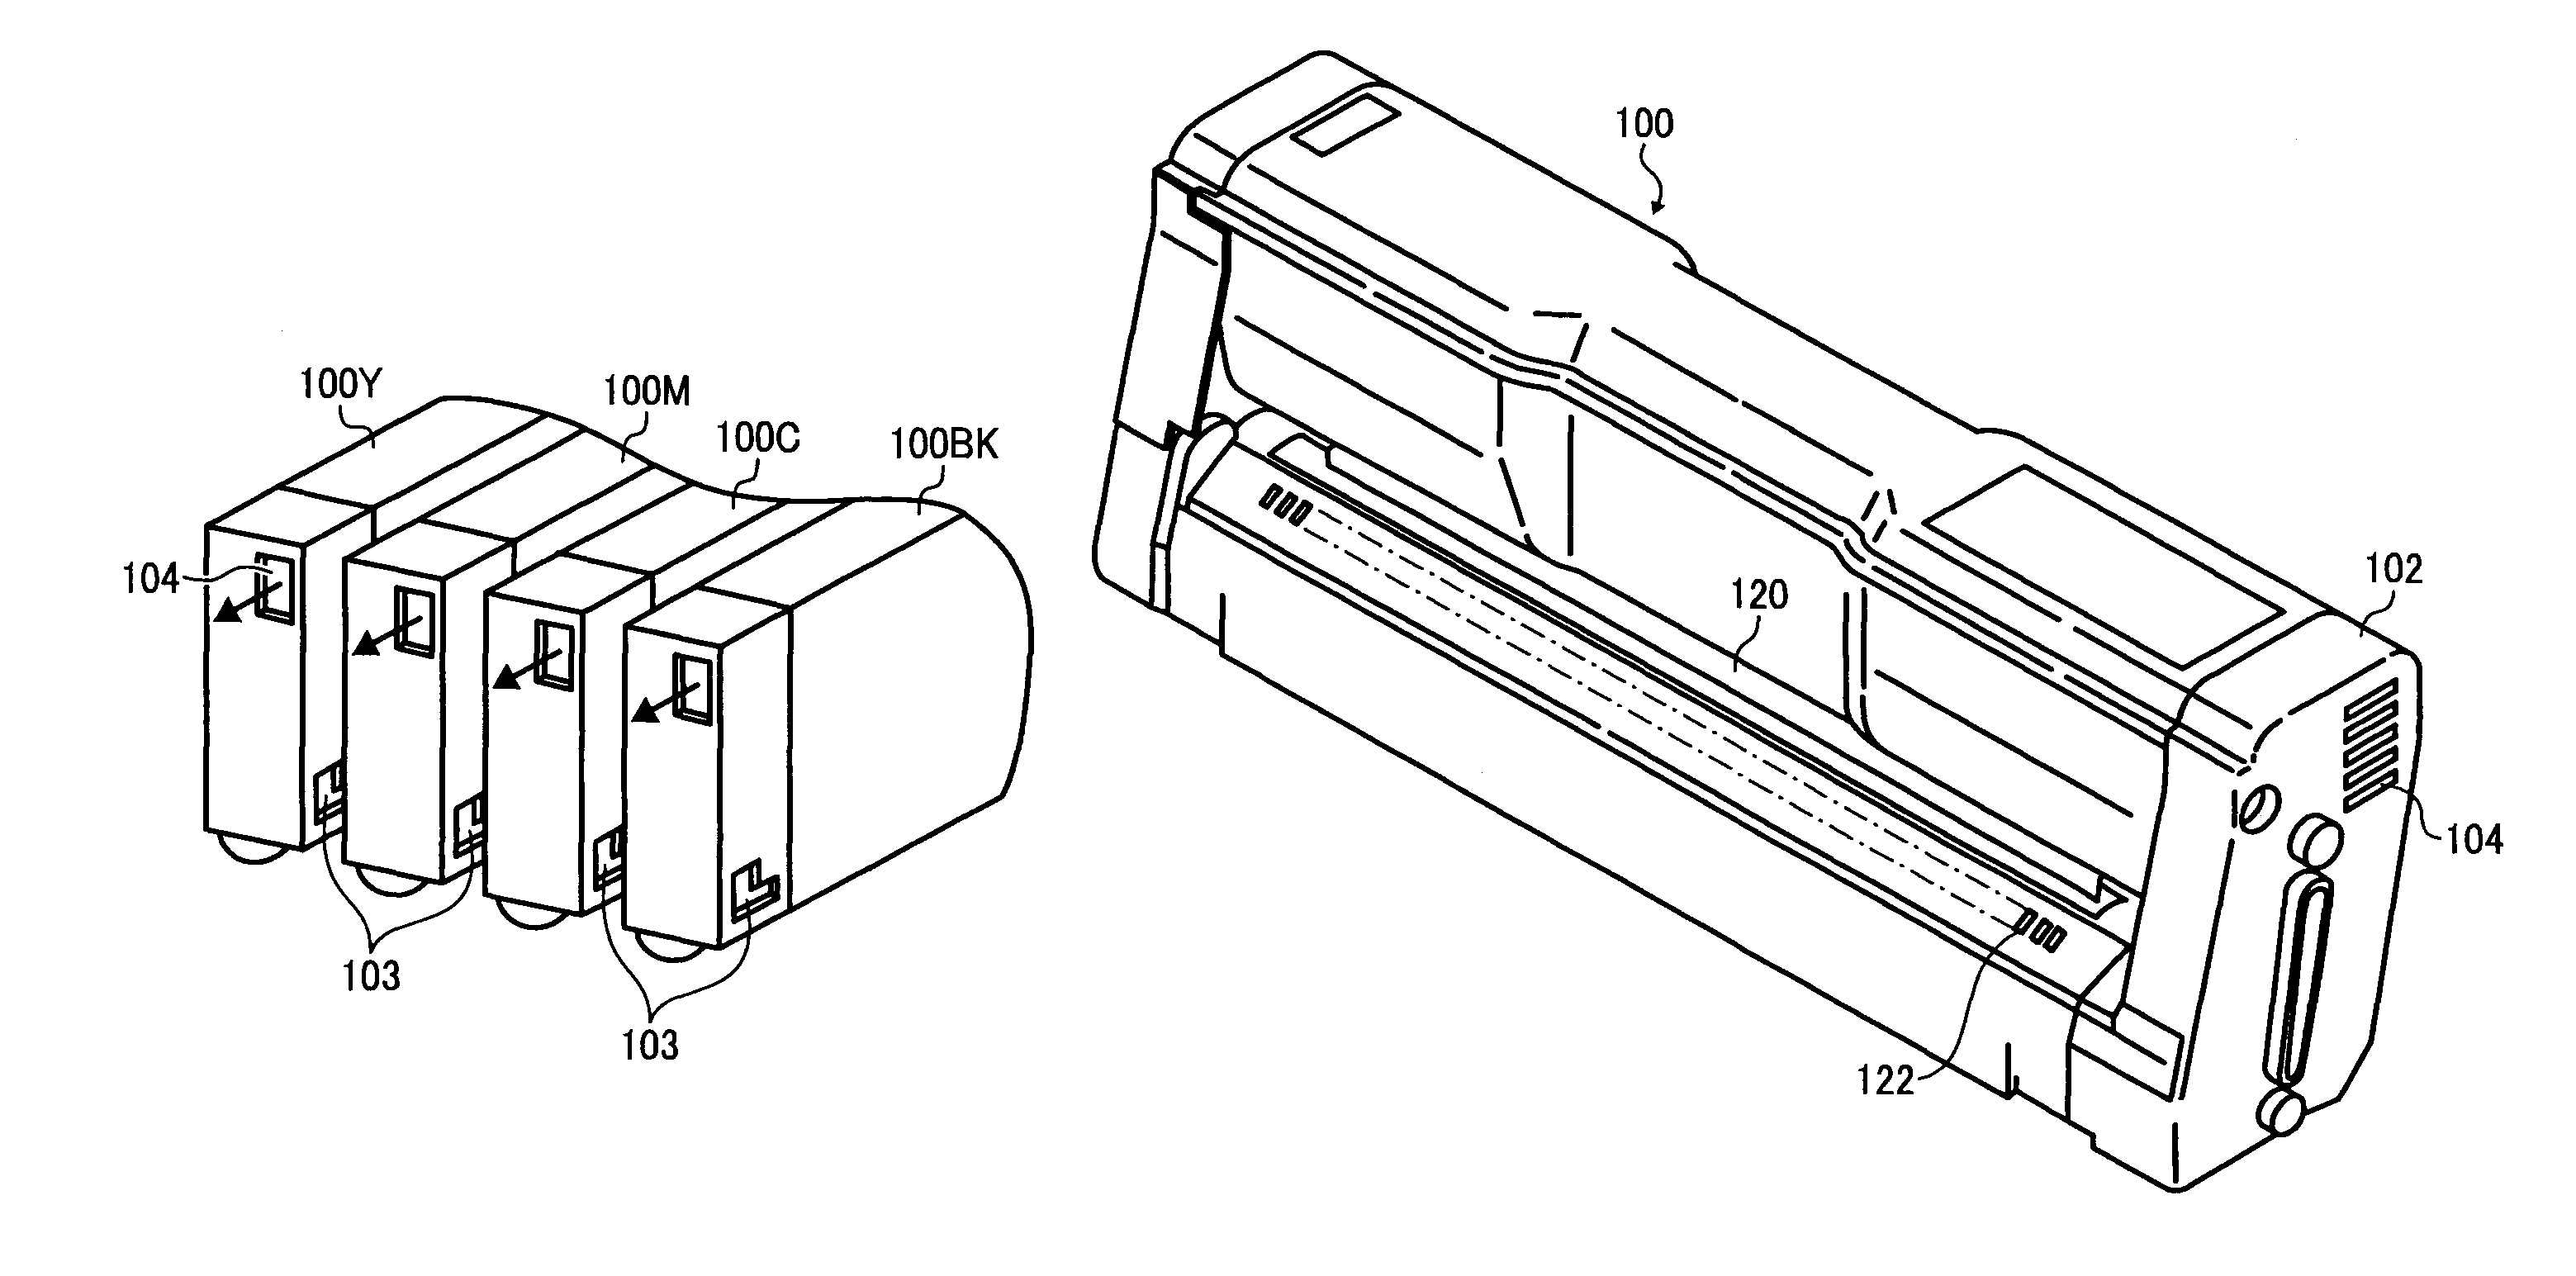 Process cartridge having air inlets and outlets for cooling gears disposed in the process cartridge